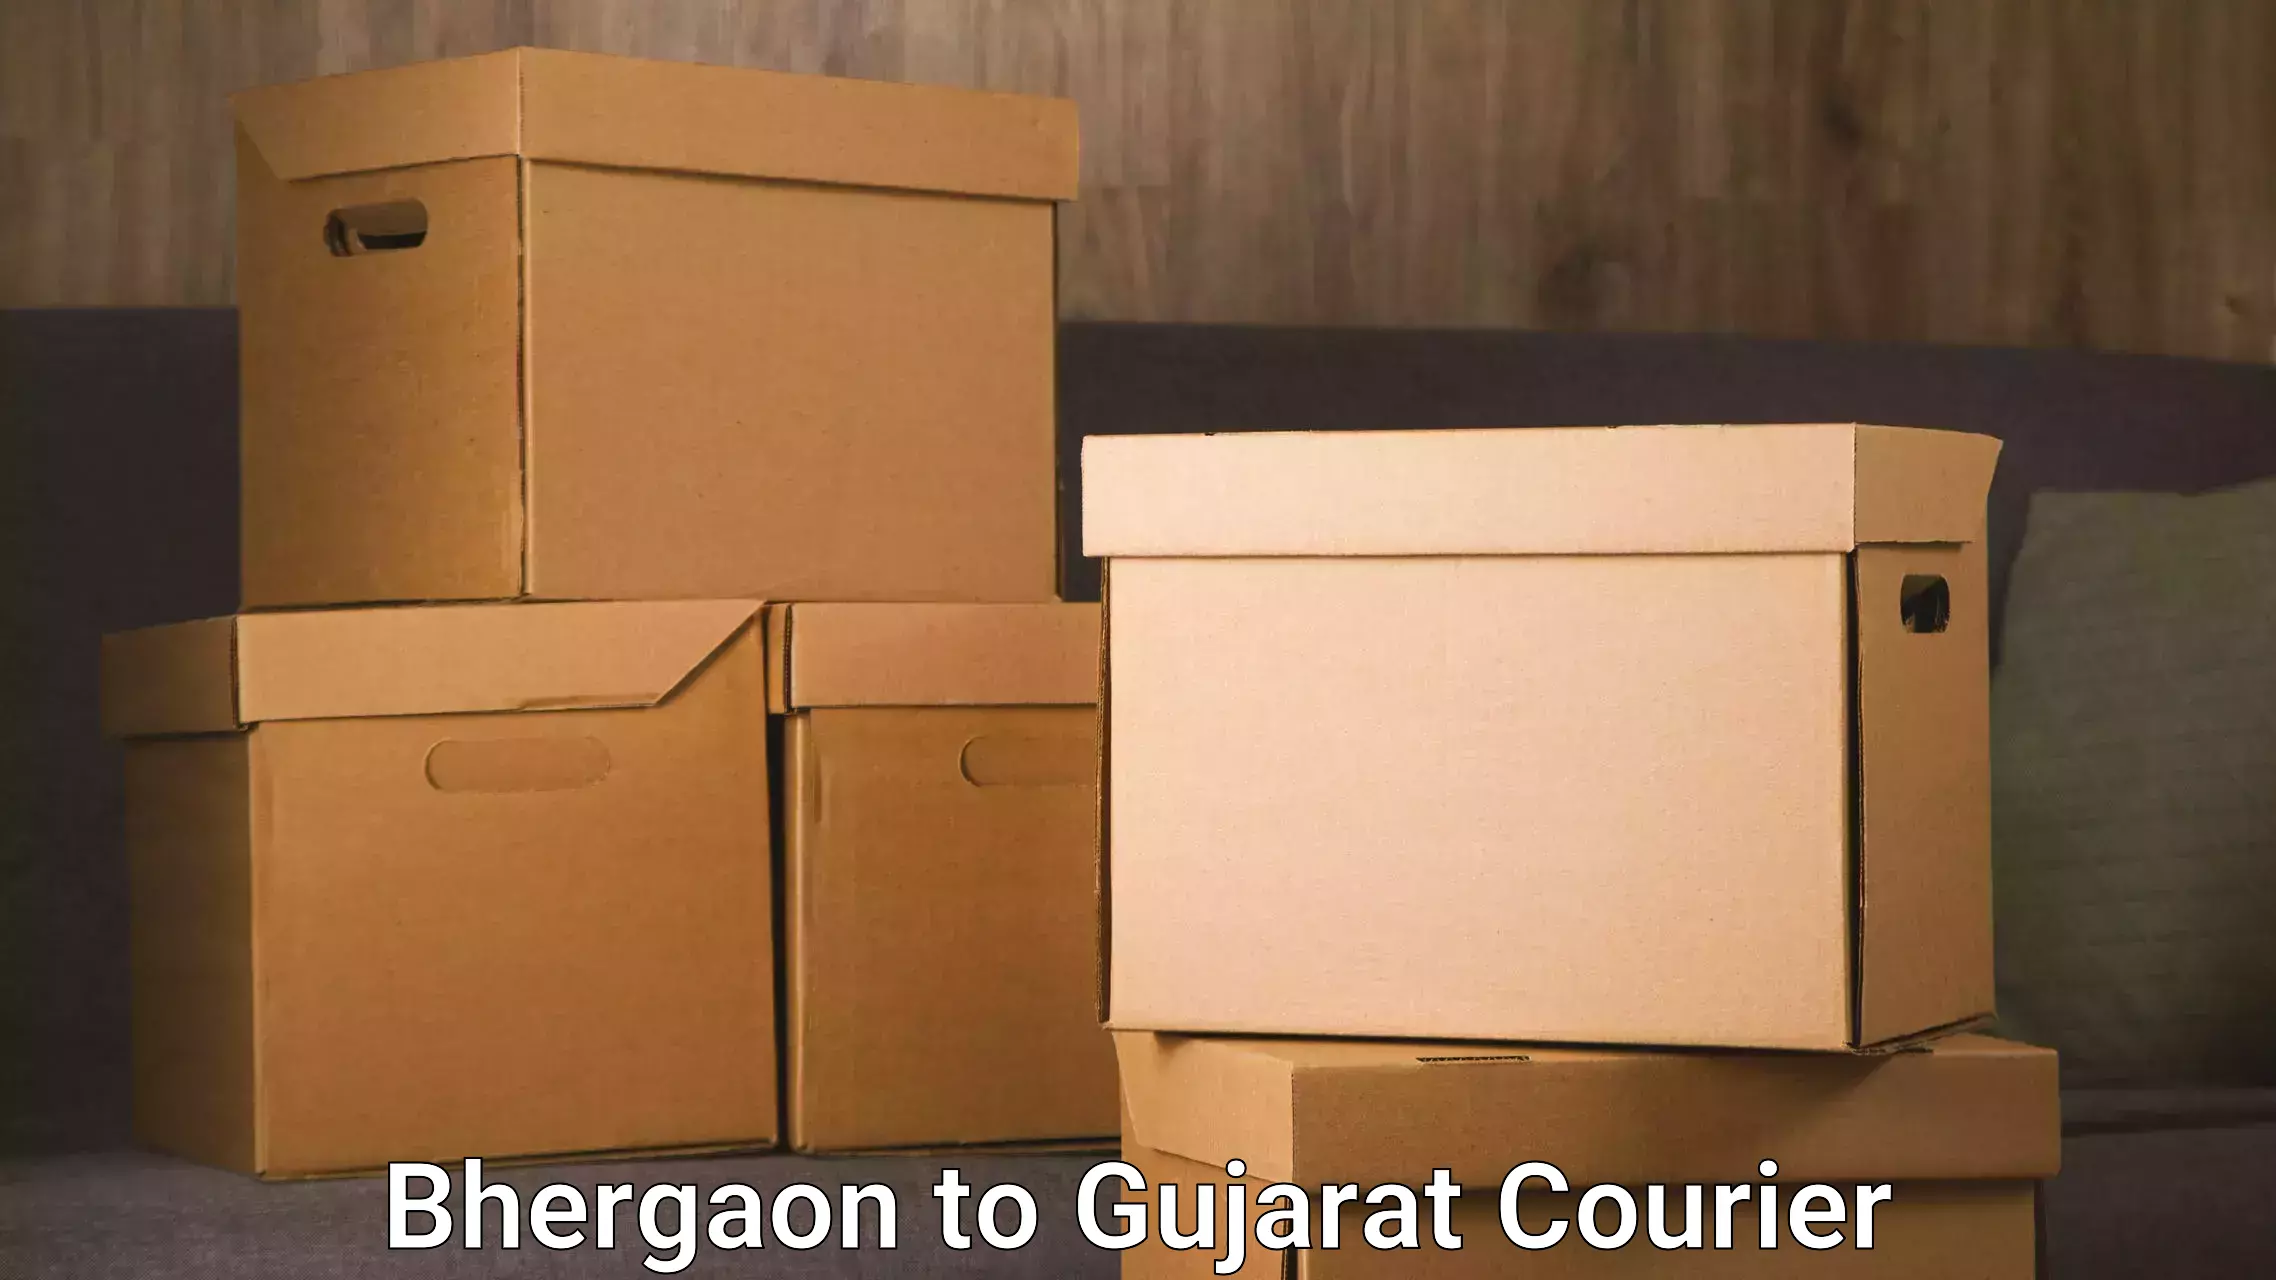 Cash on delivery service Bhergaon to Gujarat